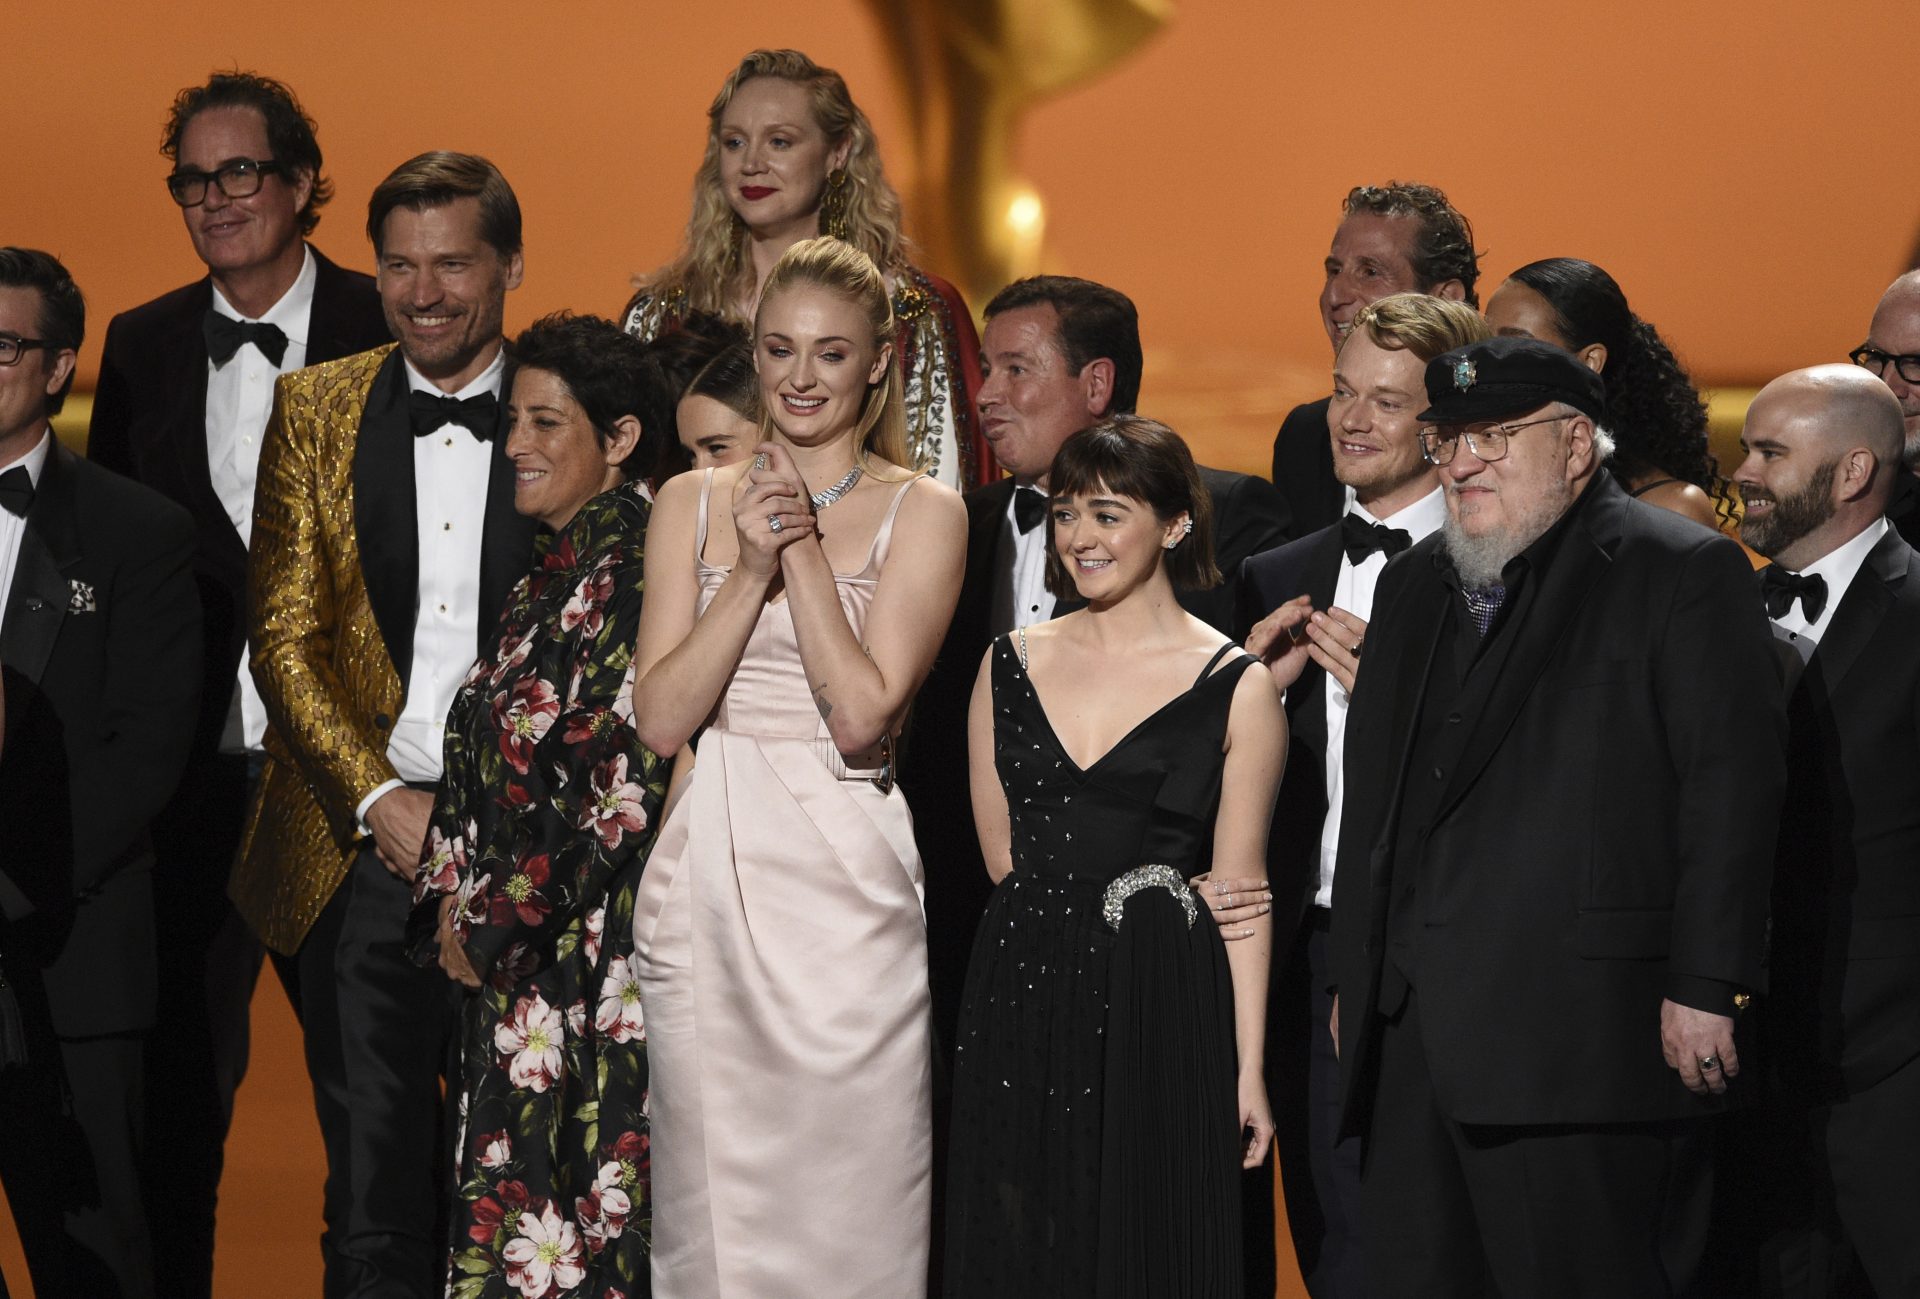 The cast and crew of "Game Of Thrones" accepts the award for outstanding drama series at the 71st Primetime Emmy Awards on Sunday, Sept. 22, 2019, at the Microsoft Theater in Los Angeles.